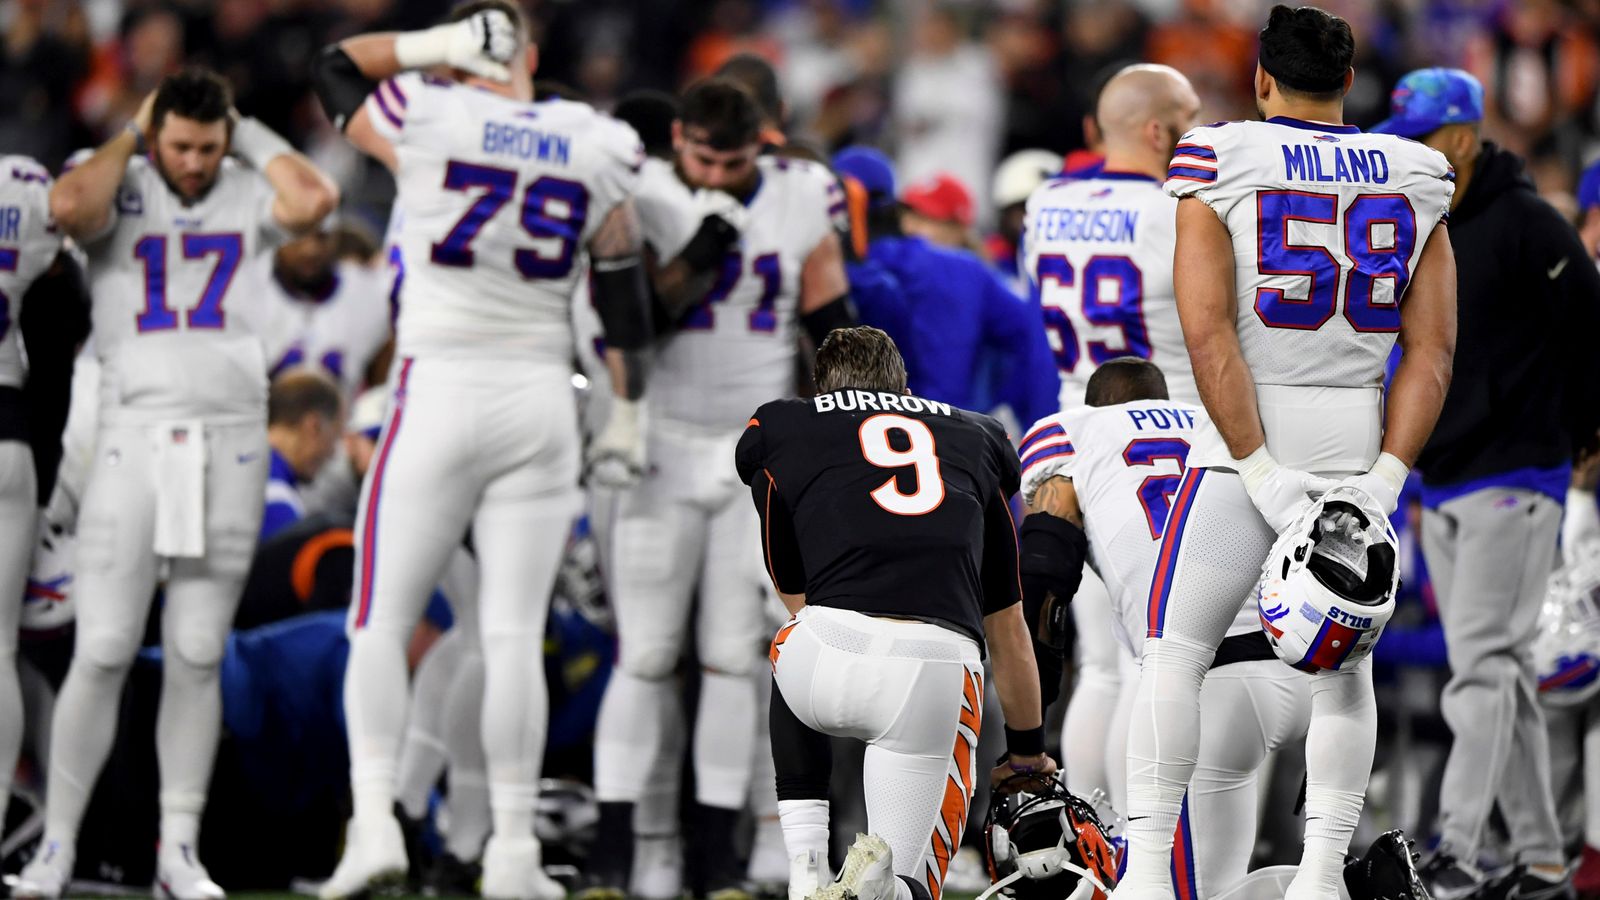 Bills vs. Bengals Won't Resume, AFC Title Game Could Take Place at